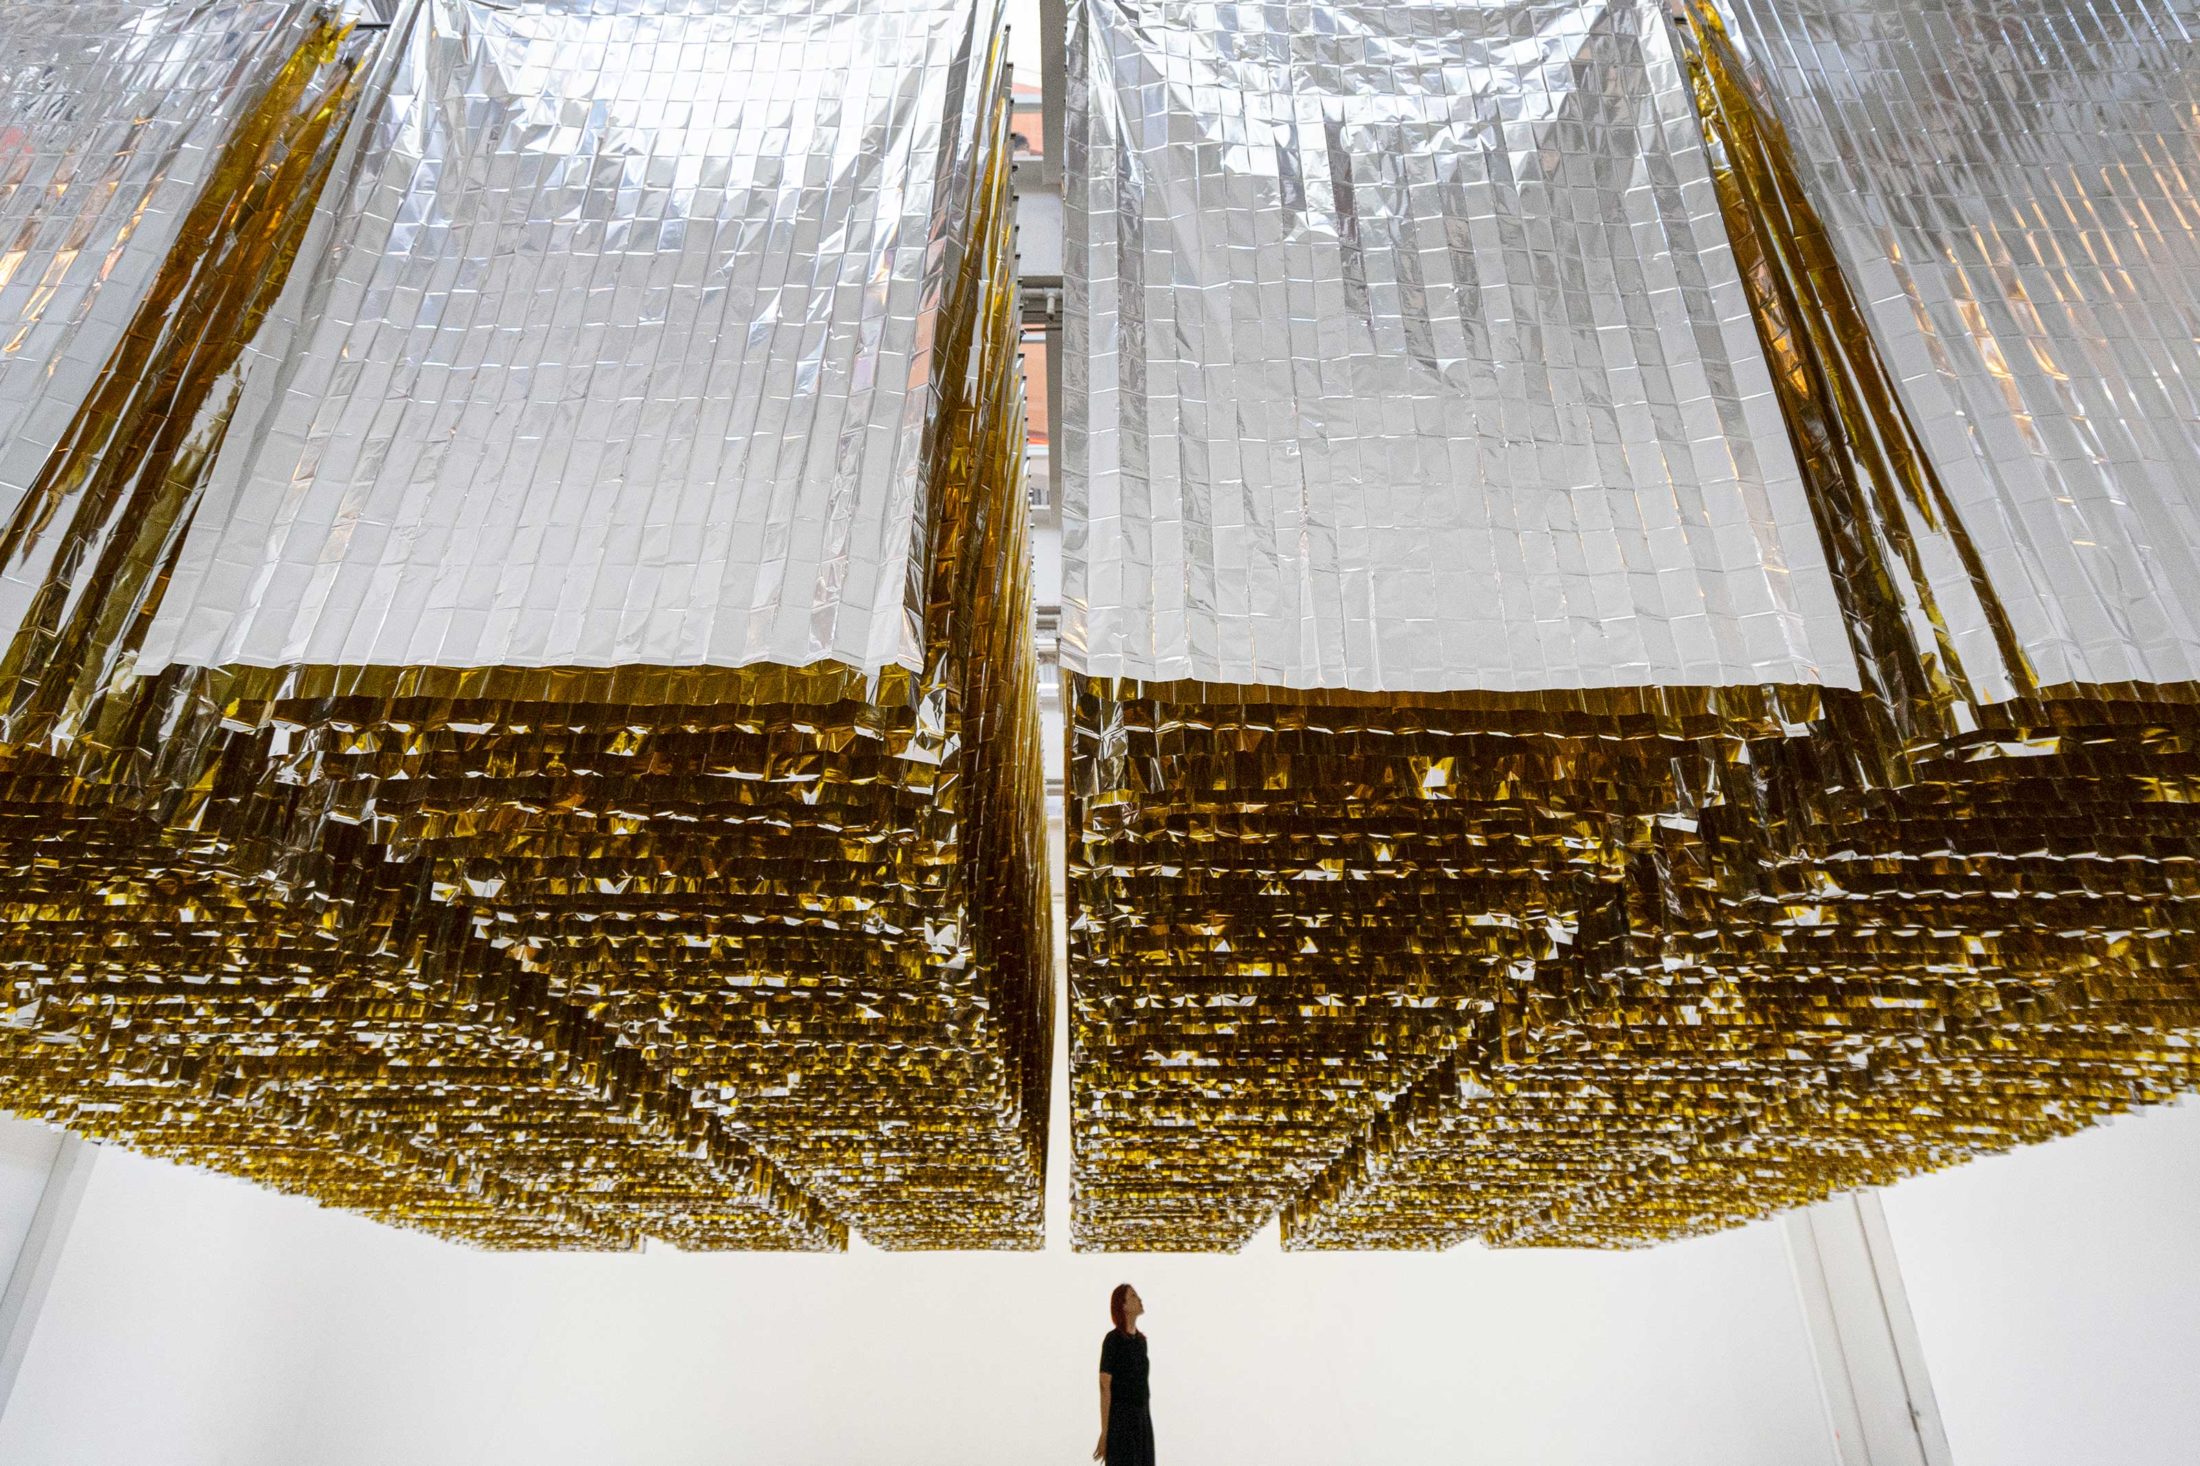 SpY_ Large-scale kinetic installation made up of thousands of emergency blankets